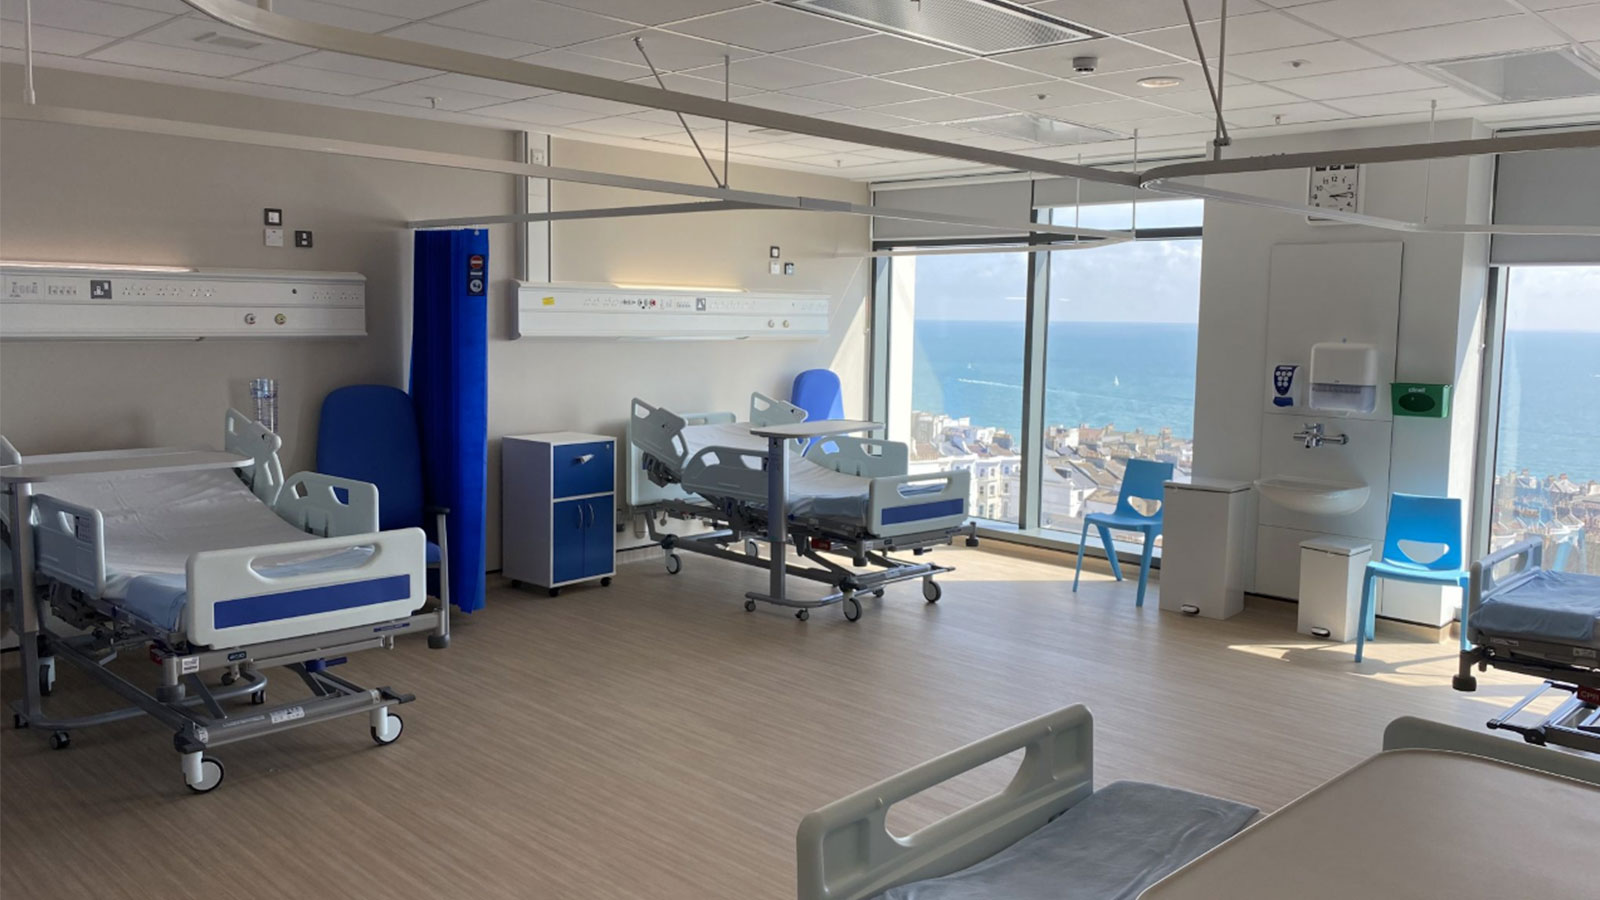 Wieland completes upgrades at Royal Sussex County Hospital in Brighton